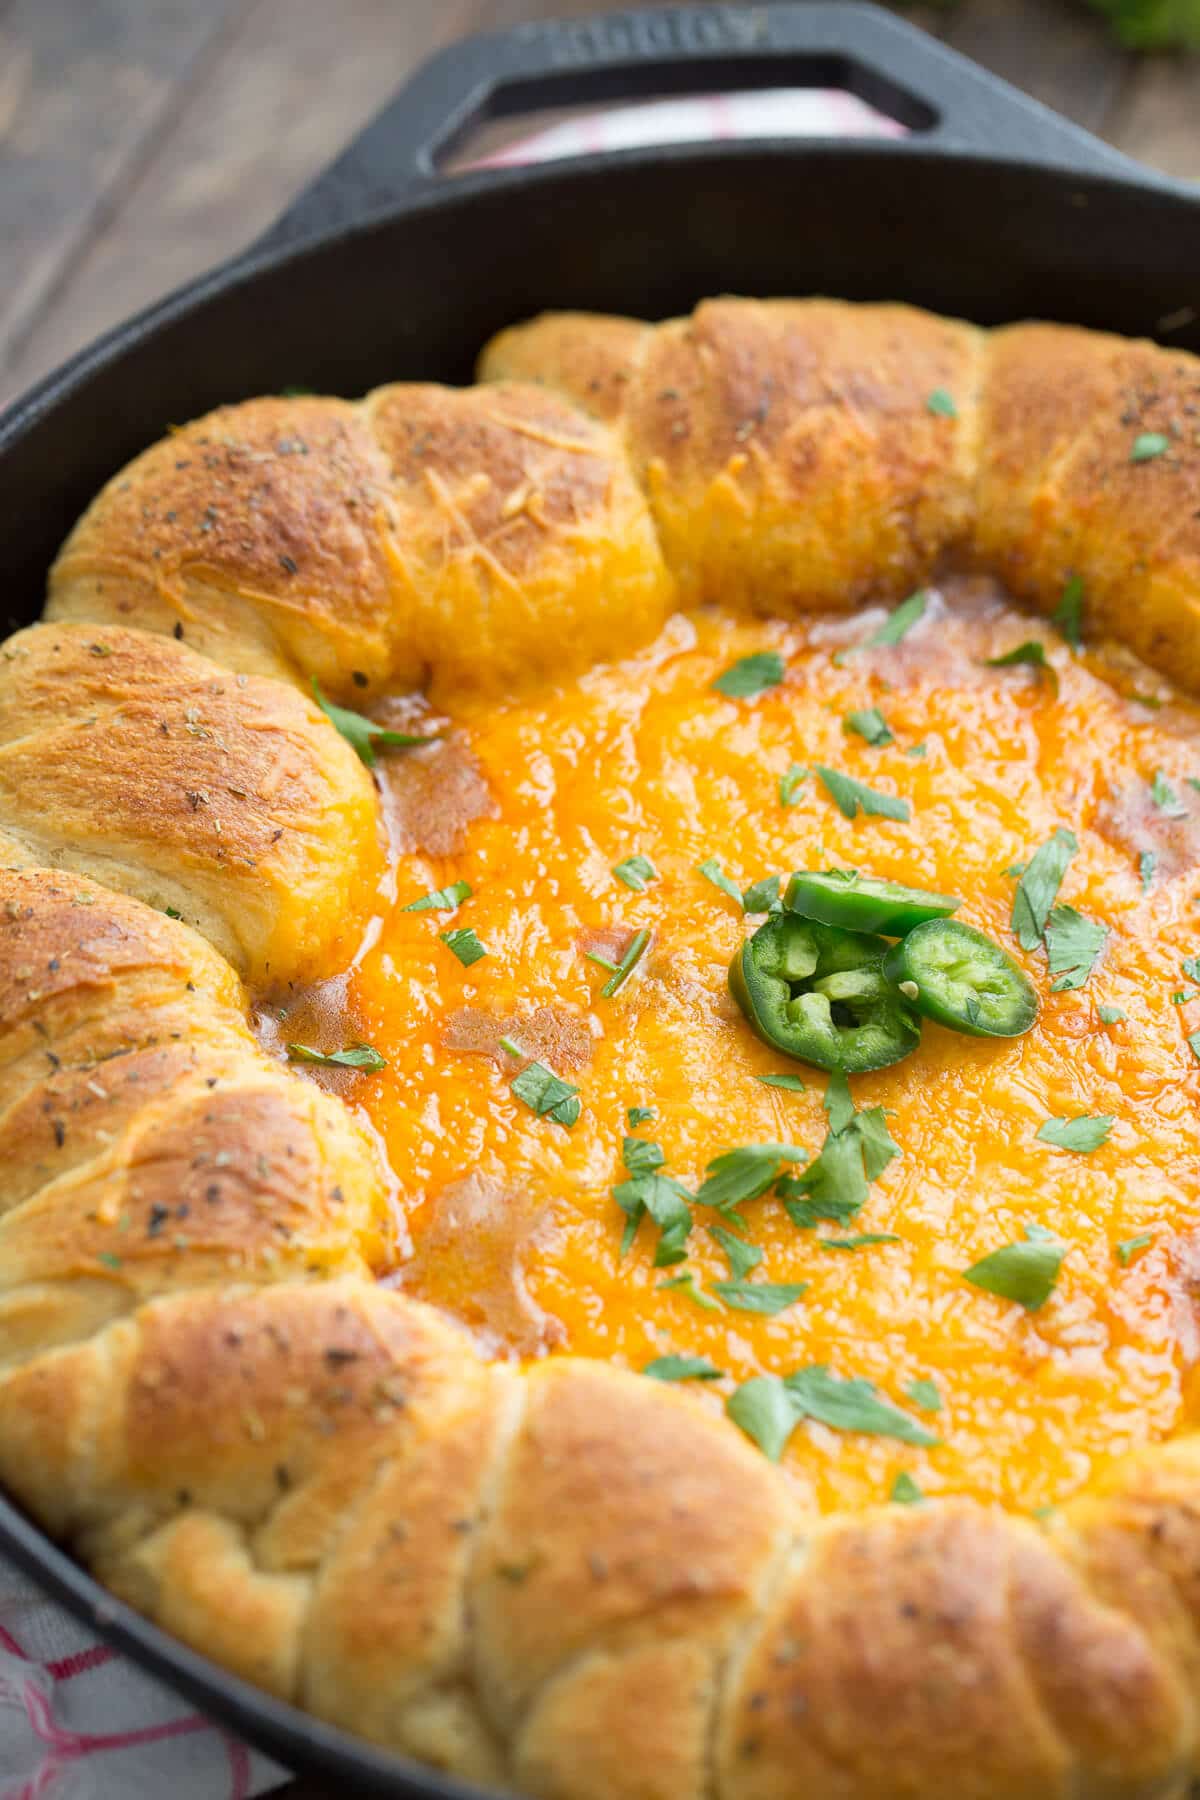 Hosting? Then you need this chili cheese dip! The skillet cooks it up nice and hot and the rolls make scooping a breeze!